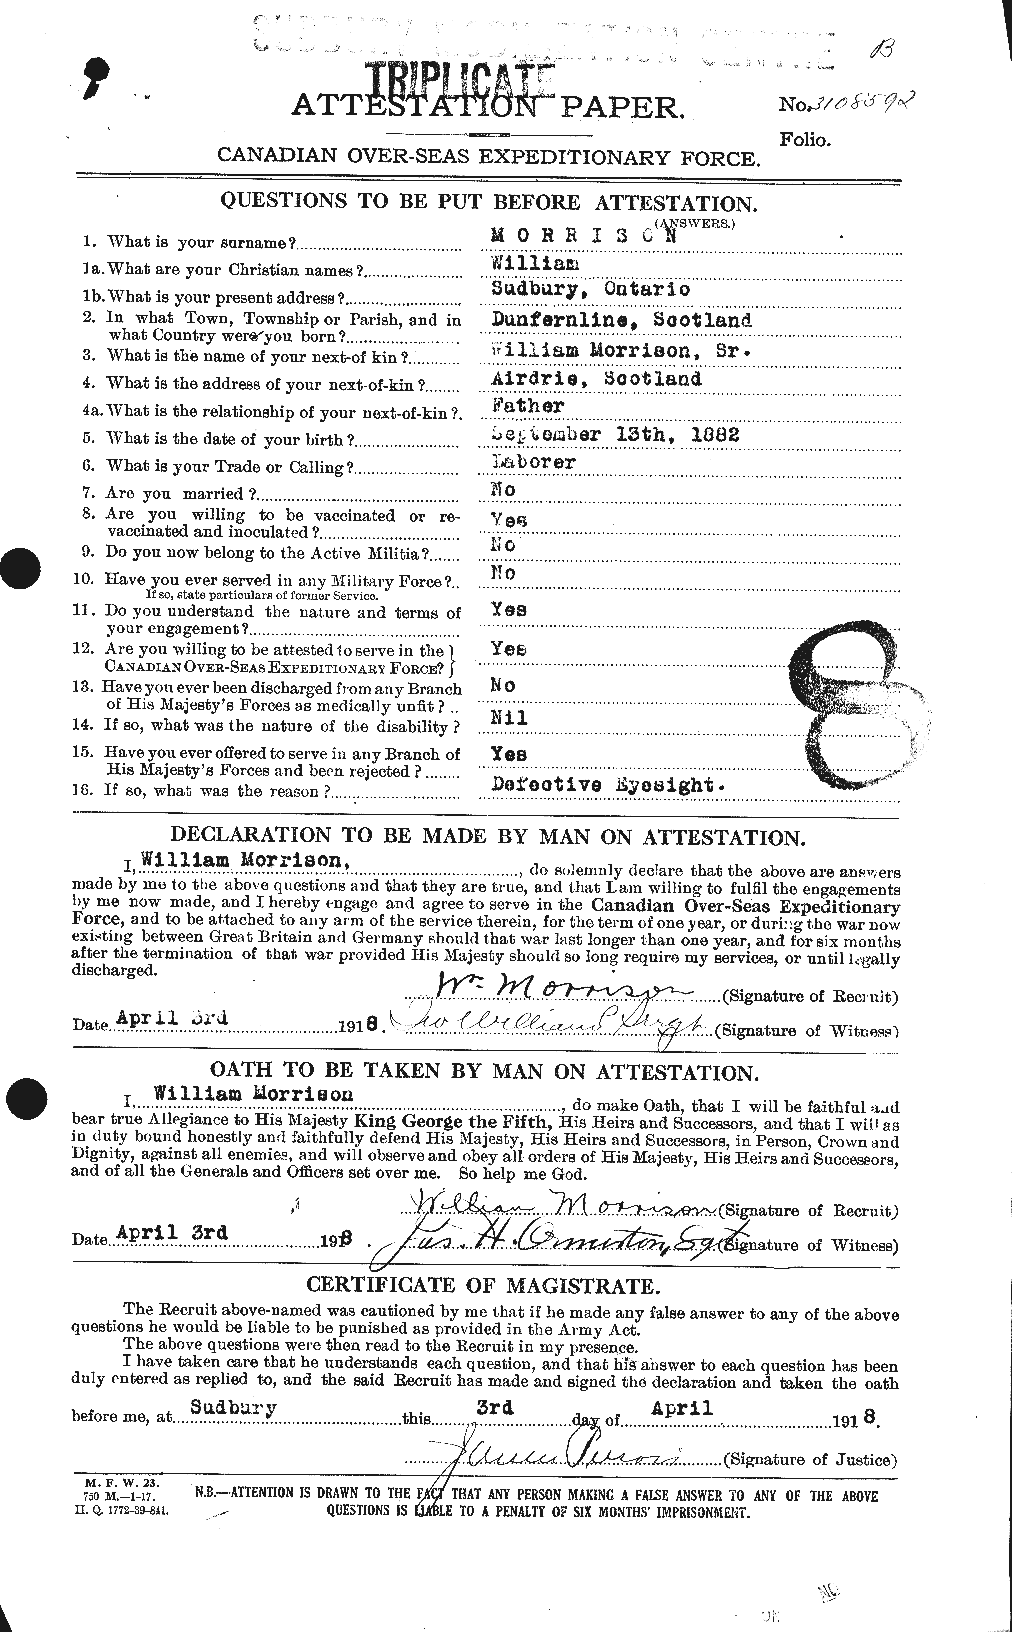 Personnel Records of the First World War - CEF 509258a